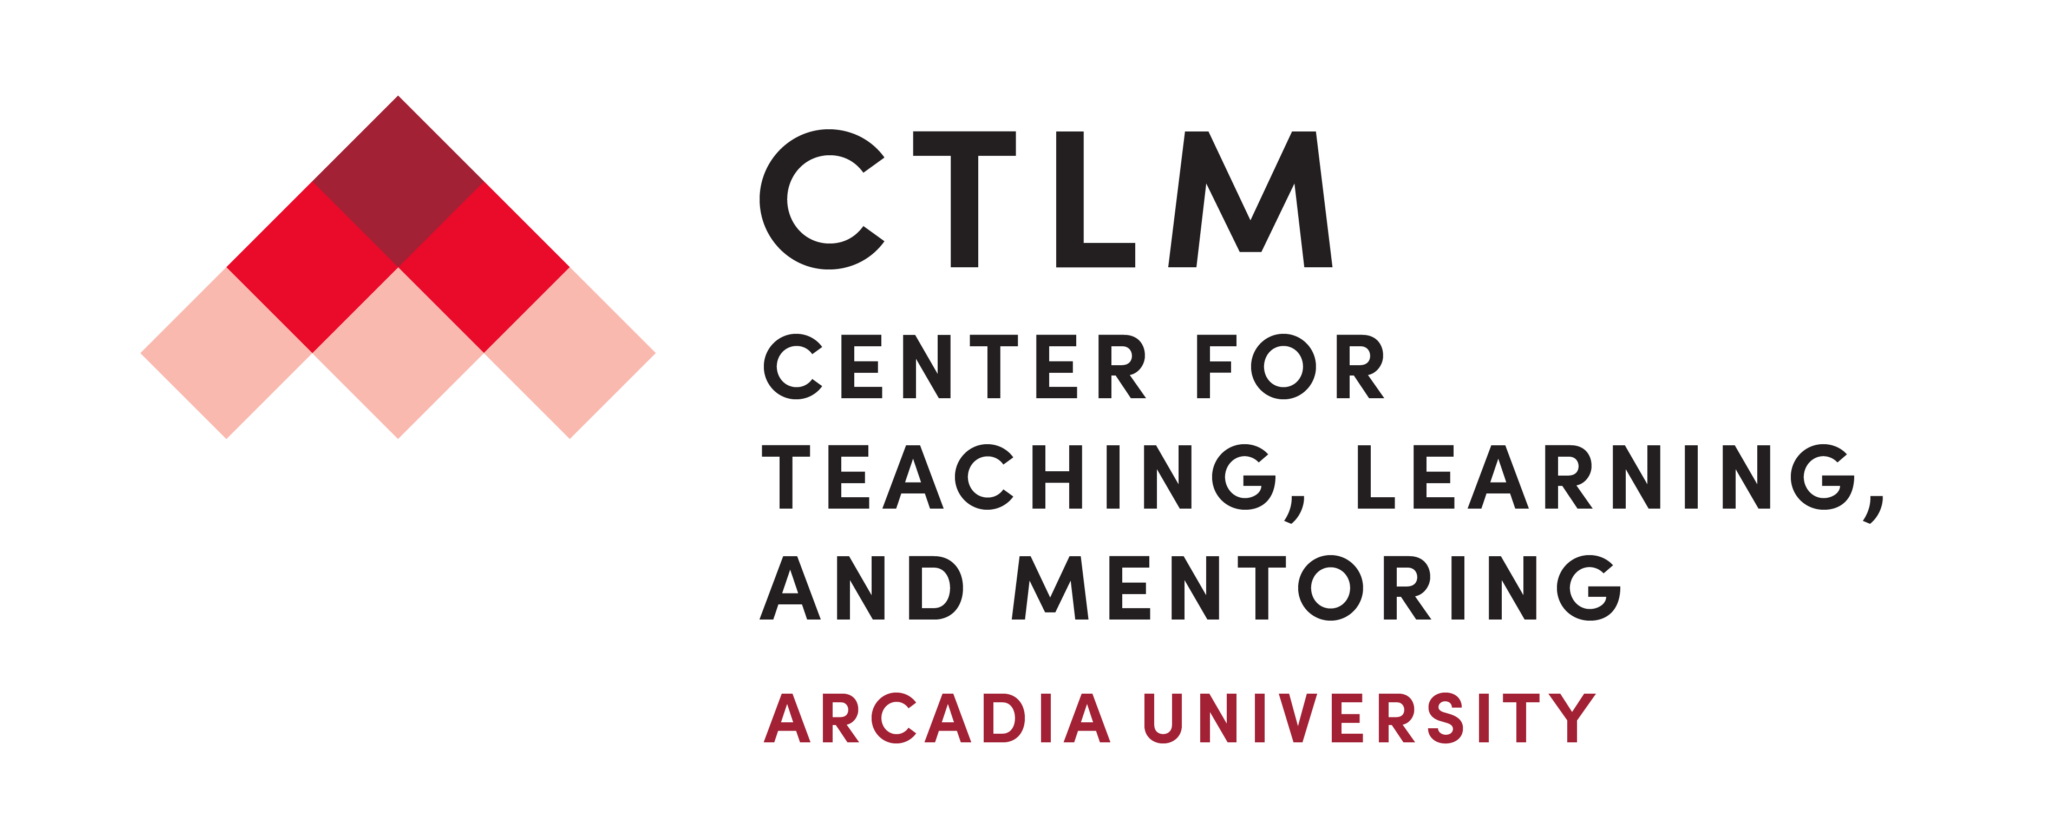 The logo for the Center for Teaching, Learning, and Mentoring.